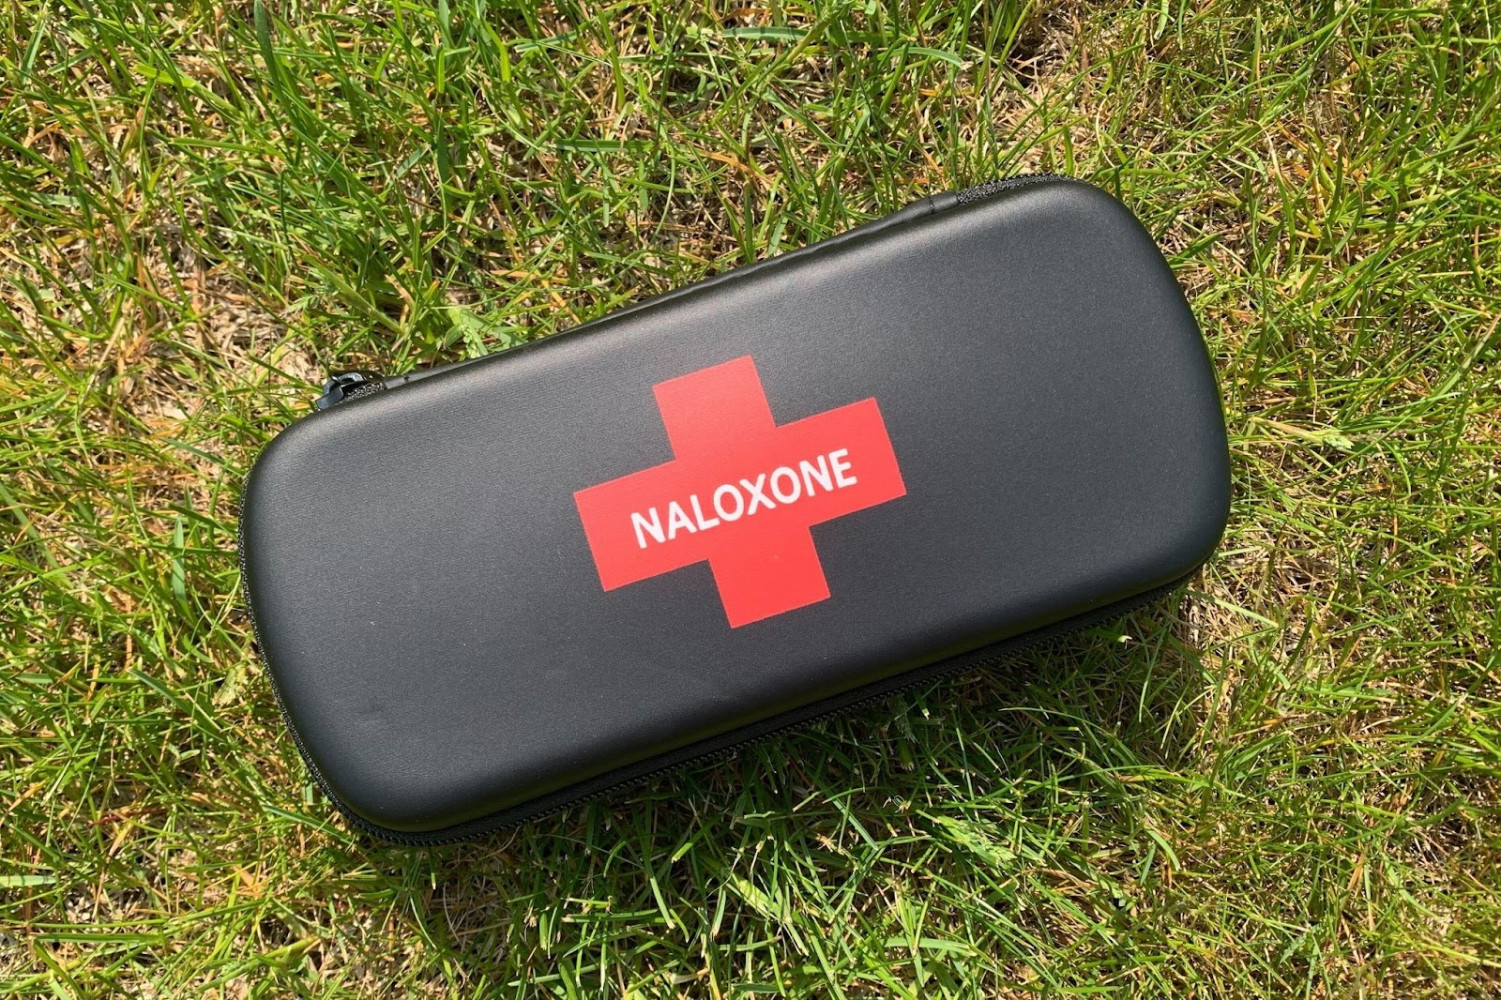 PCs say mandatory naloxone program for high-risk workplaces first of its kind in North America